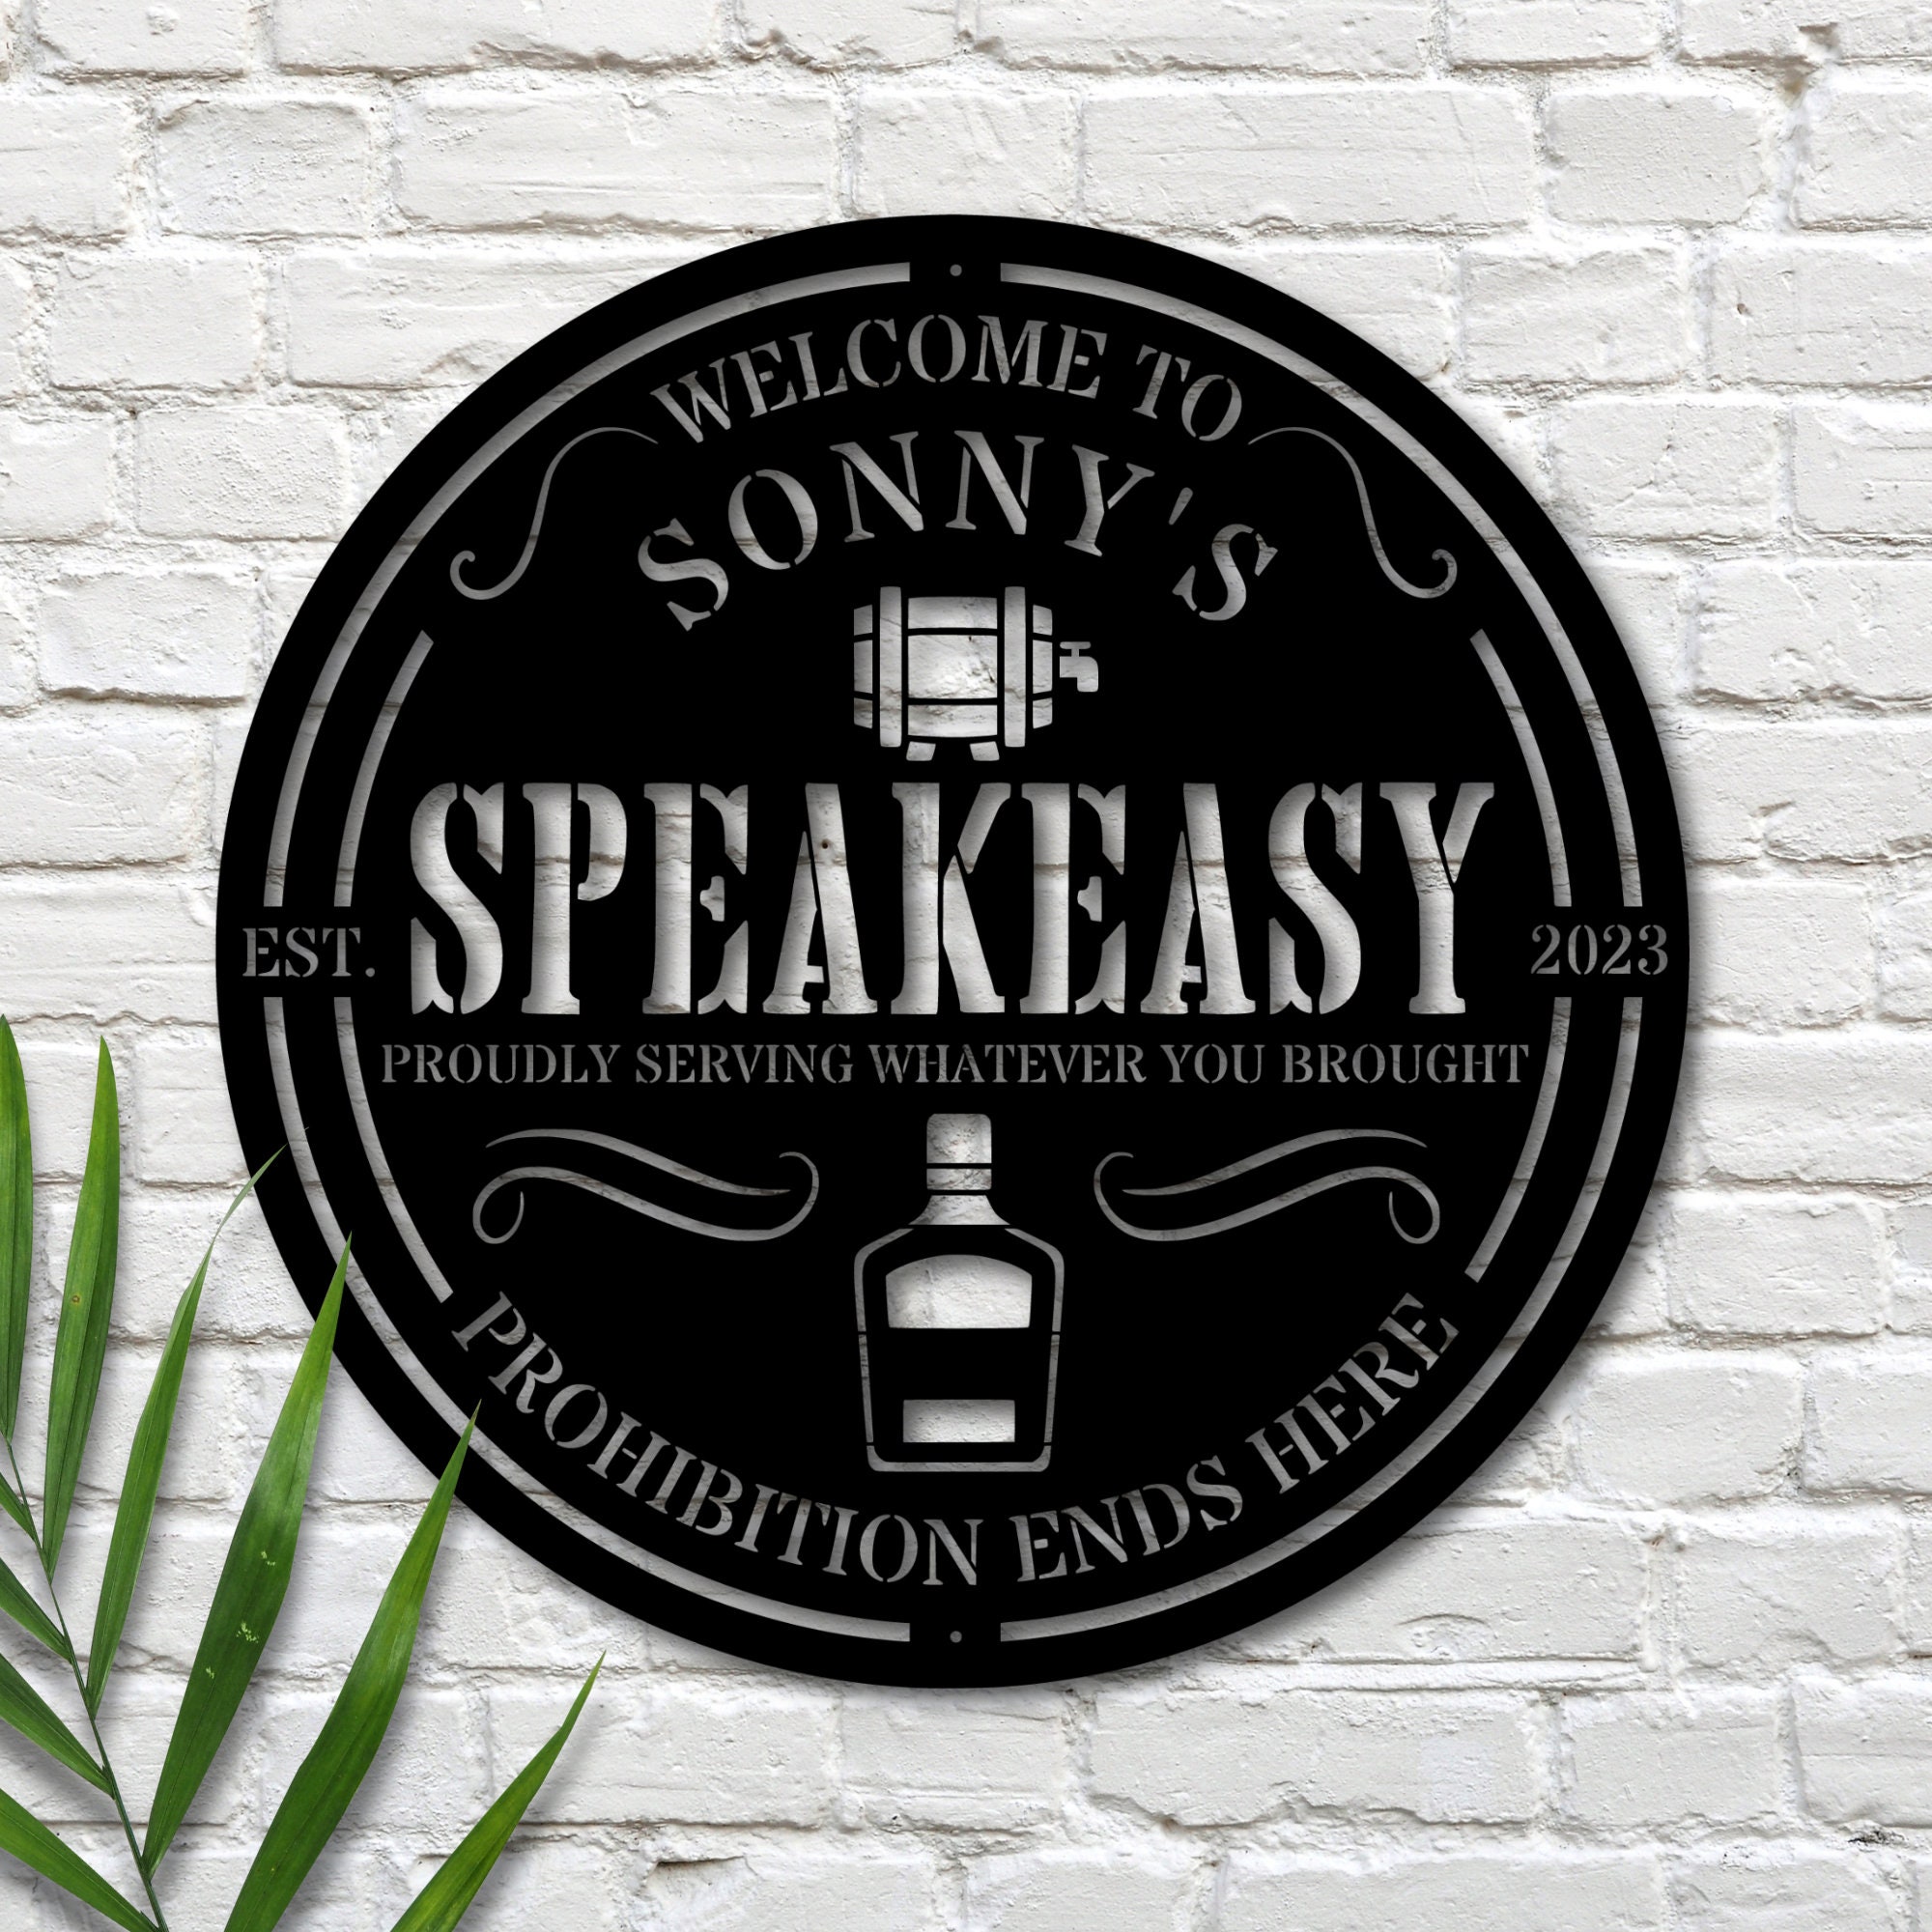  Vintage Entrance To Speakeasy Tin Sign Retro Speakeasy Decor  Speak Easy Funny Metal Signs Speakeasy Party Decorations For Boys Room 20s  Wall Art Decoration Sign : Home & Kitchen